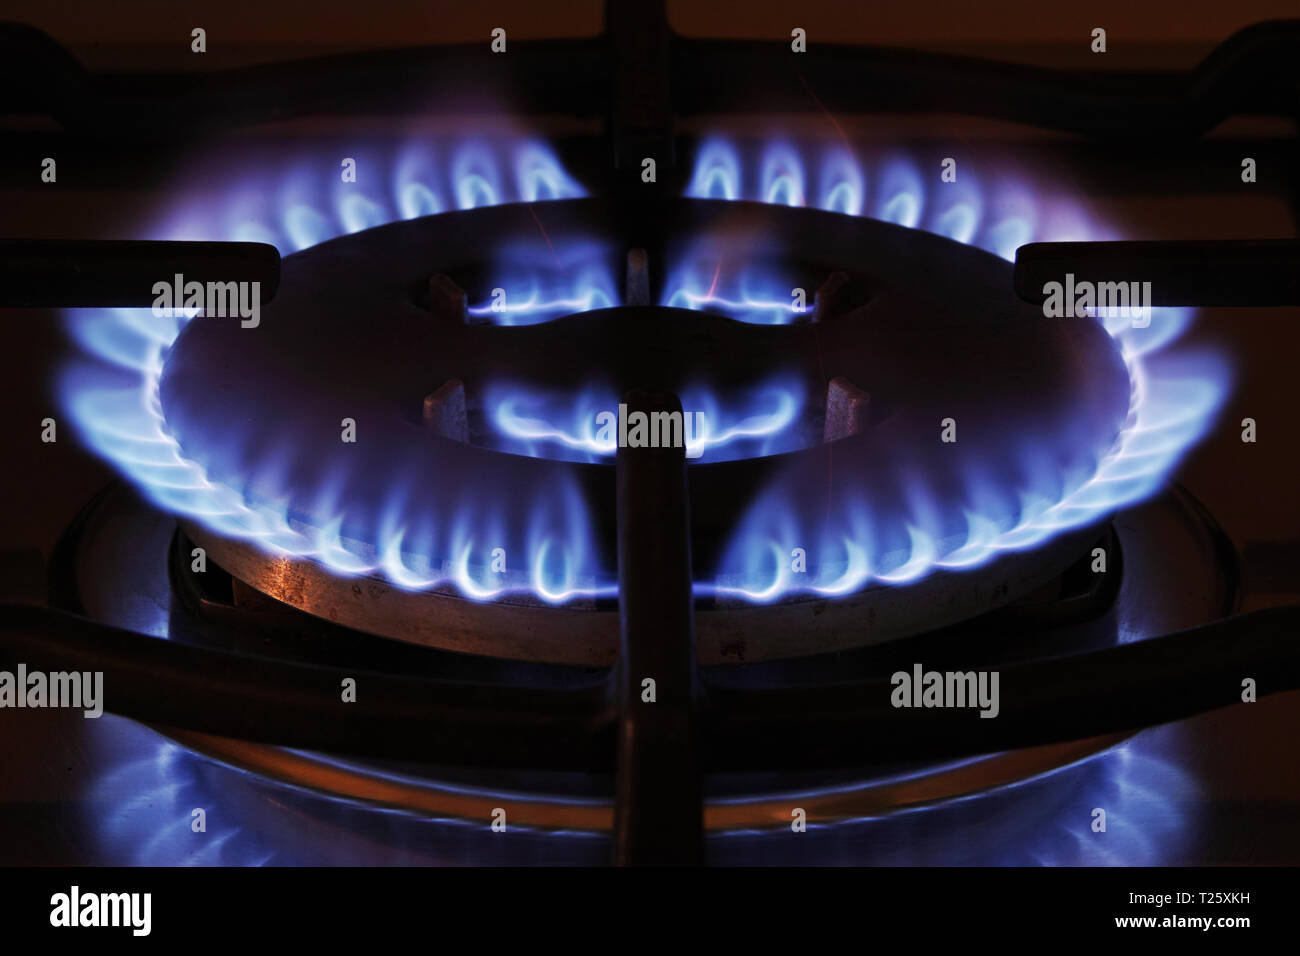 burner of a methane gas cooker in operation Stock Photo